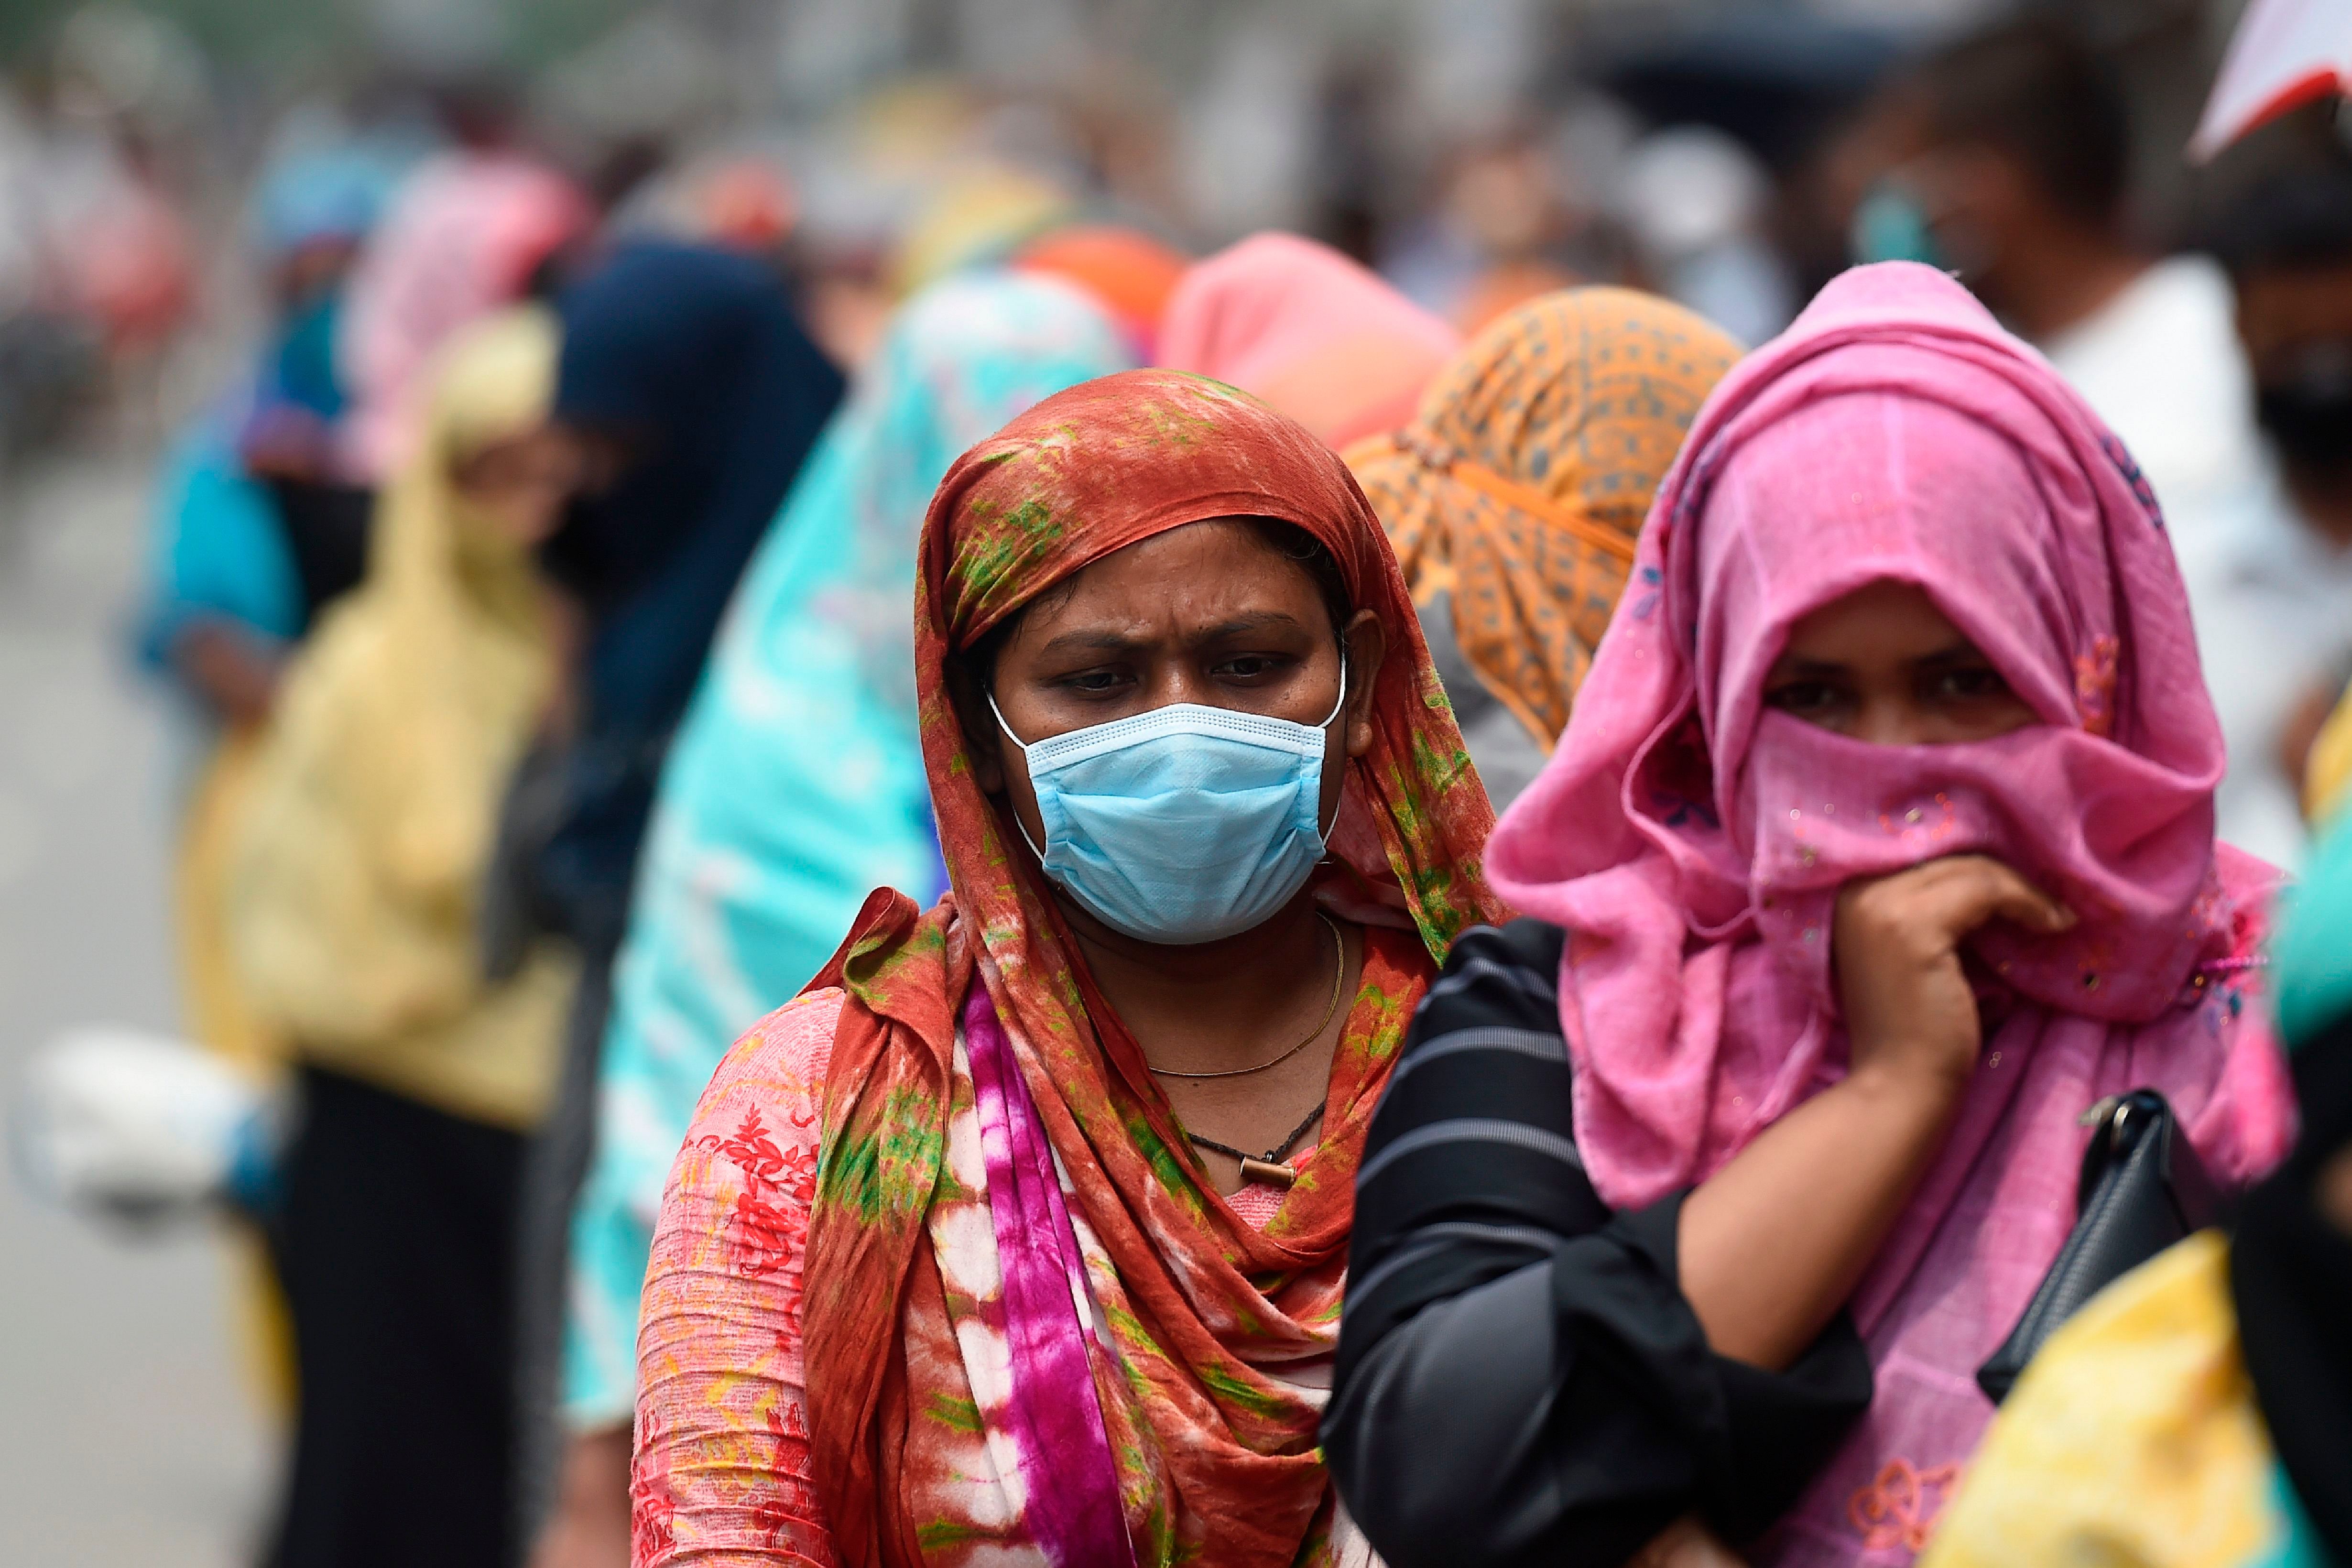 People queue to collect subsidised food items during a government-imposed nationwide lockdown as a preventive measure against the COVID-19 coronavirus, in Dhaka. (Credit: AFP Photo)